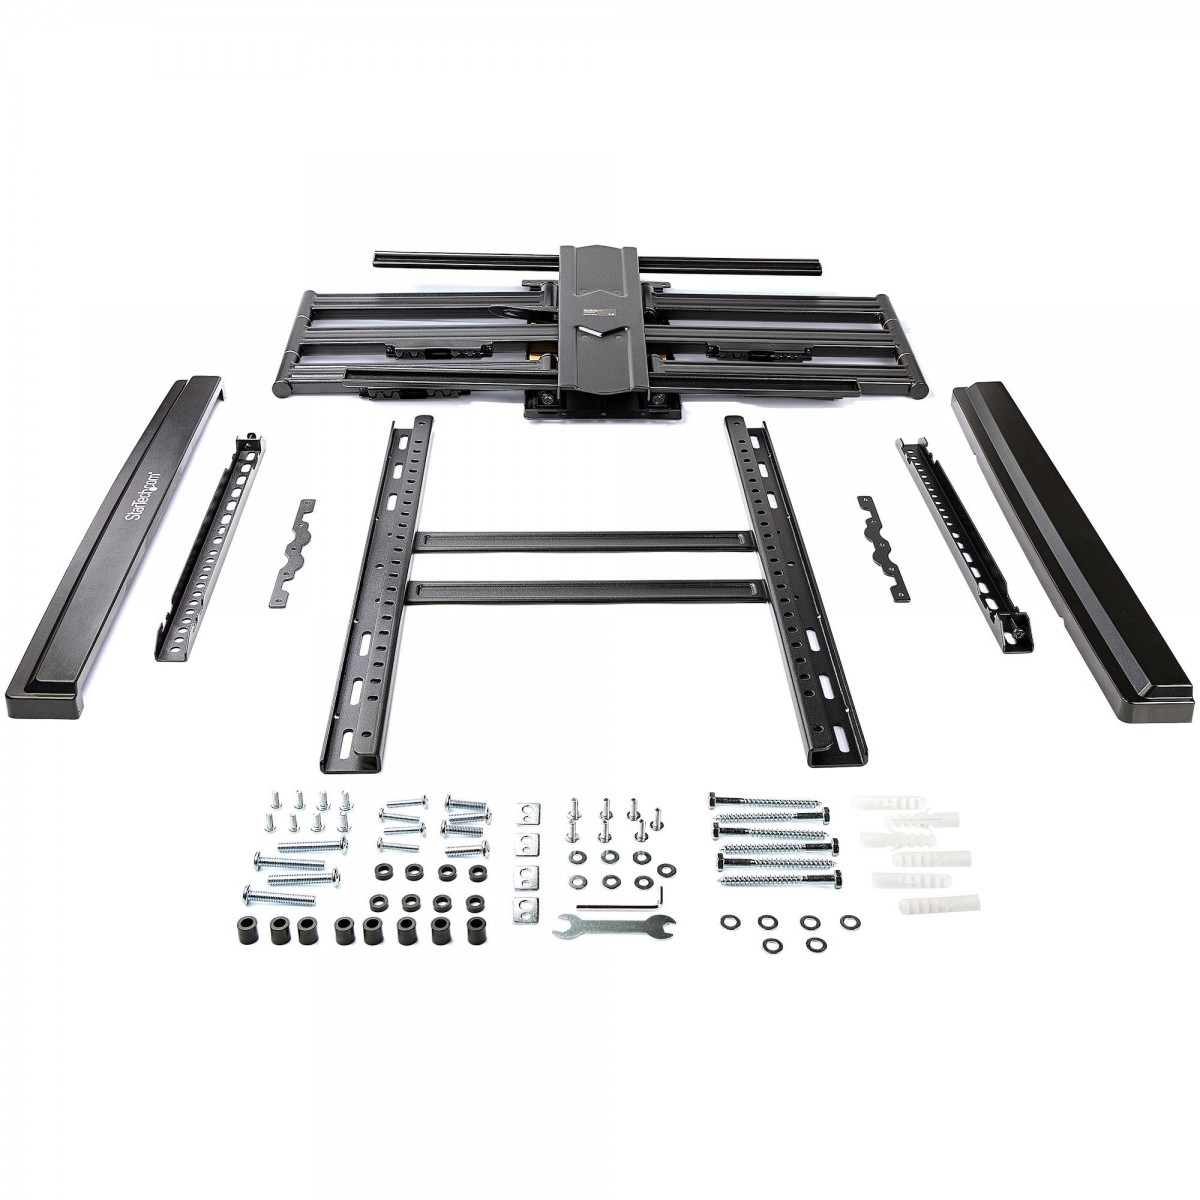 StarTech.com TV Wall Mount supports up to 100" VESA Displays - Low Profile Full Motion TV Wall Mount for Large Displays - Heavy 